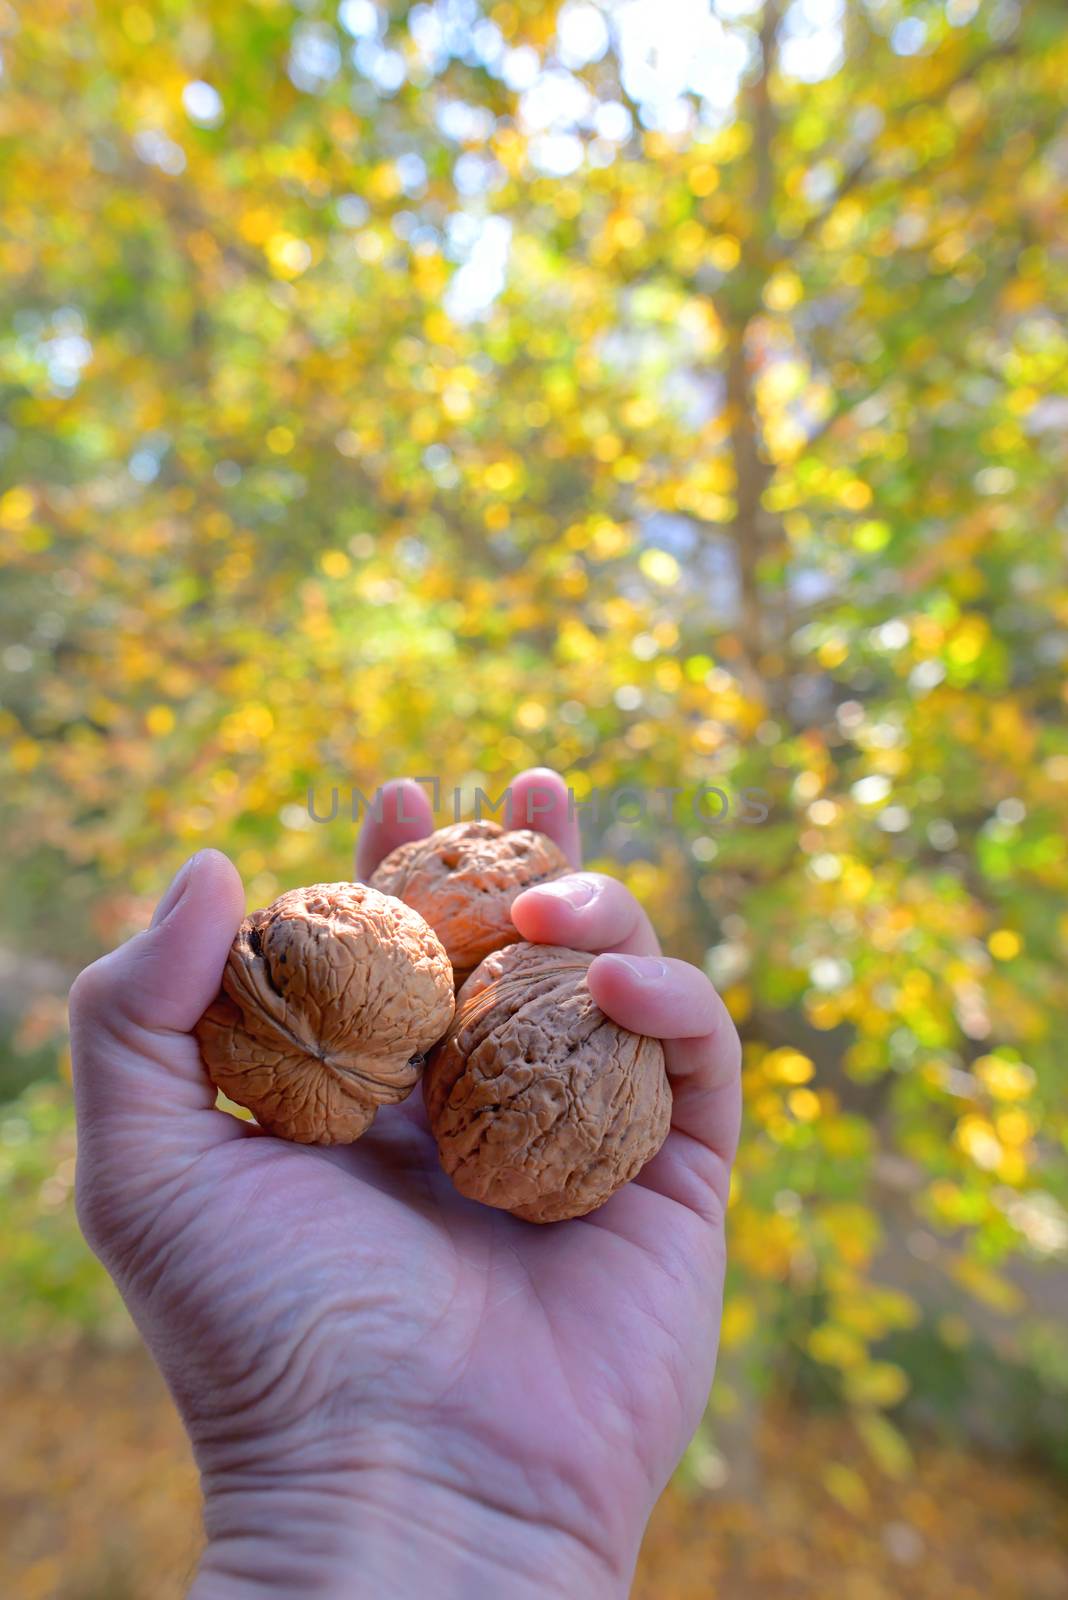 Ripe walnuts in a hand by mady70